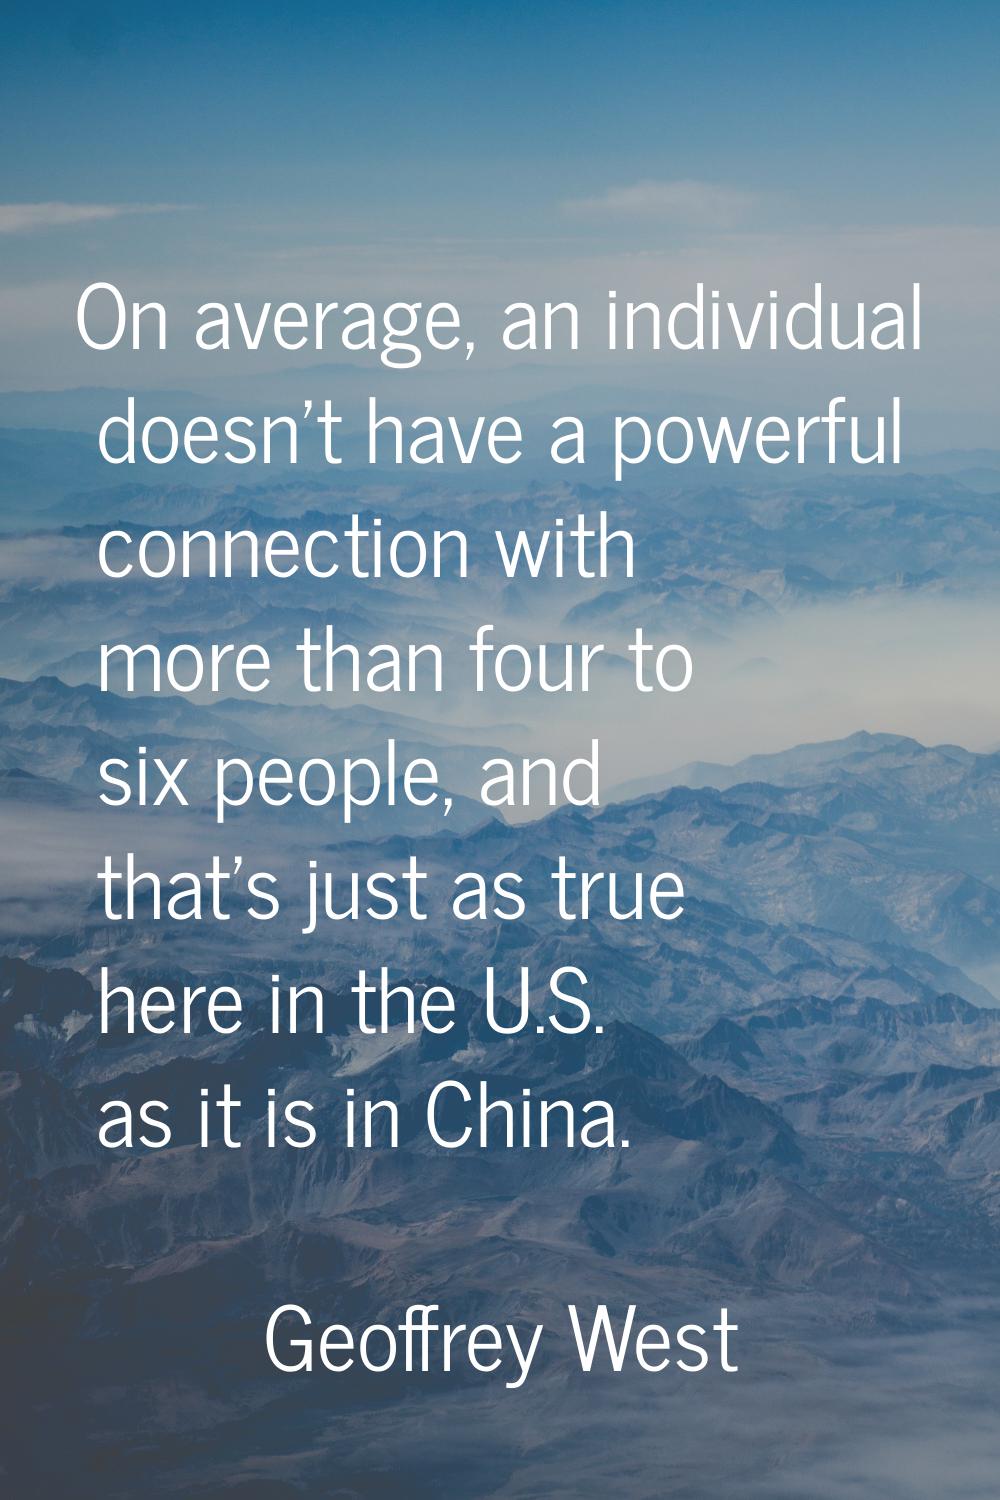 On average, an individual doesn't have a powerful connection with more than four to six people, and